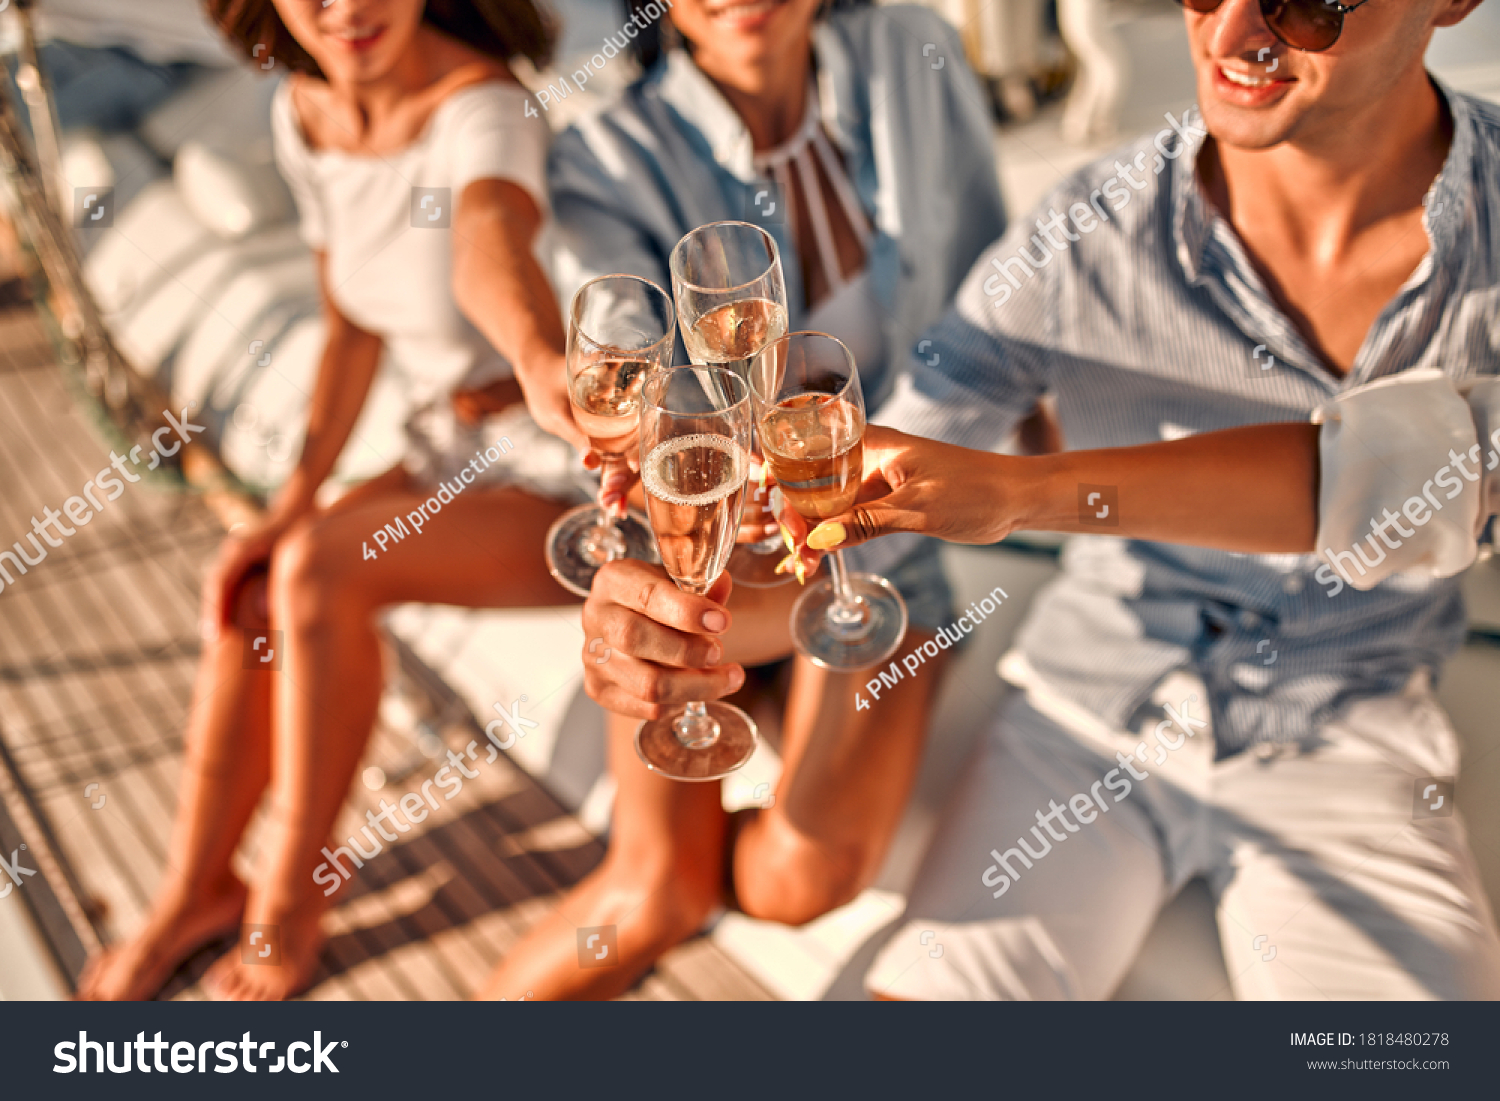 Cheers! Cropped image of group of friends relaxing on luxury yacht and drinking champagne. Having fun together while sailing in the sea. Traveling and yachting concept. #1818480278